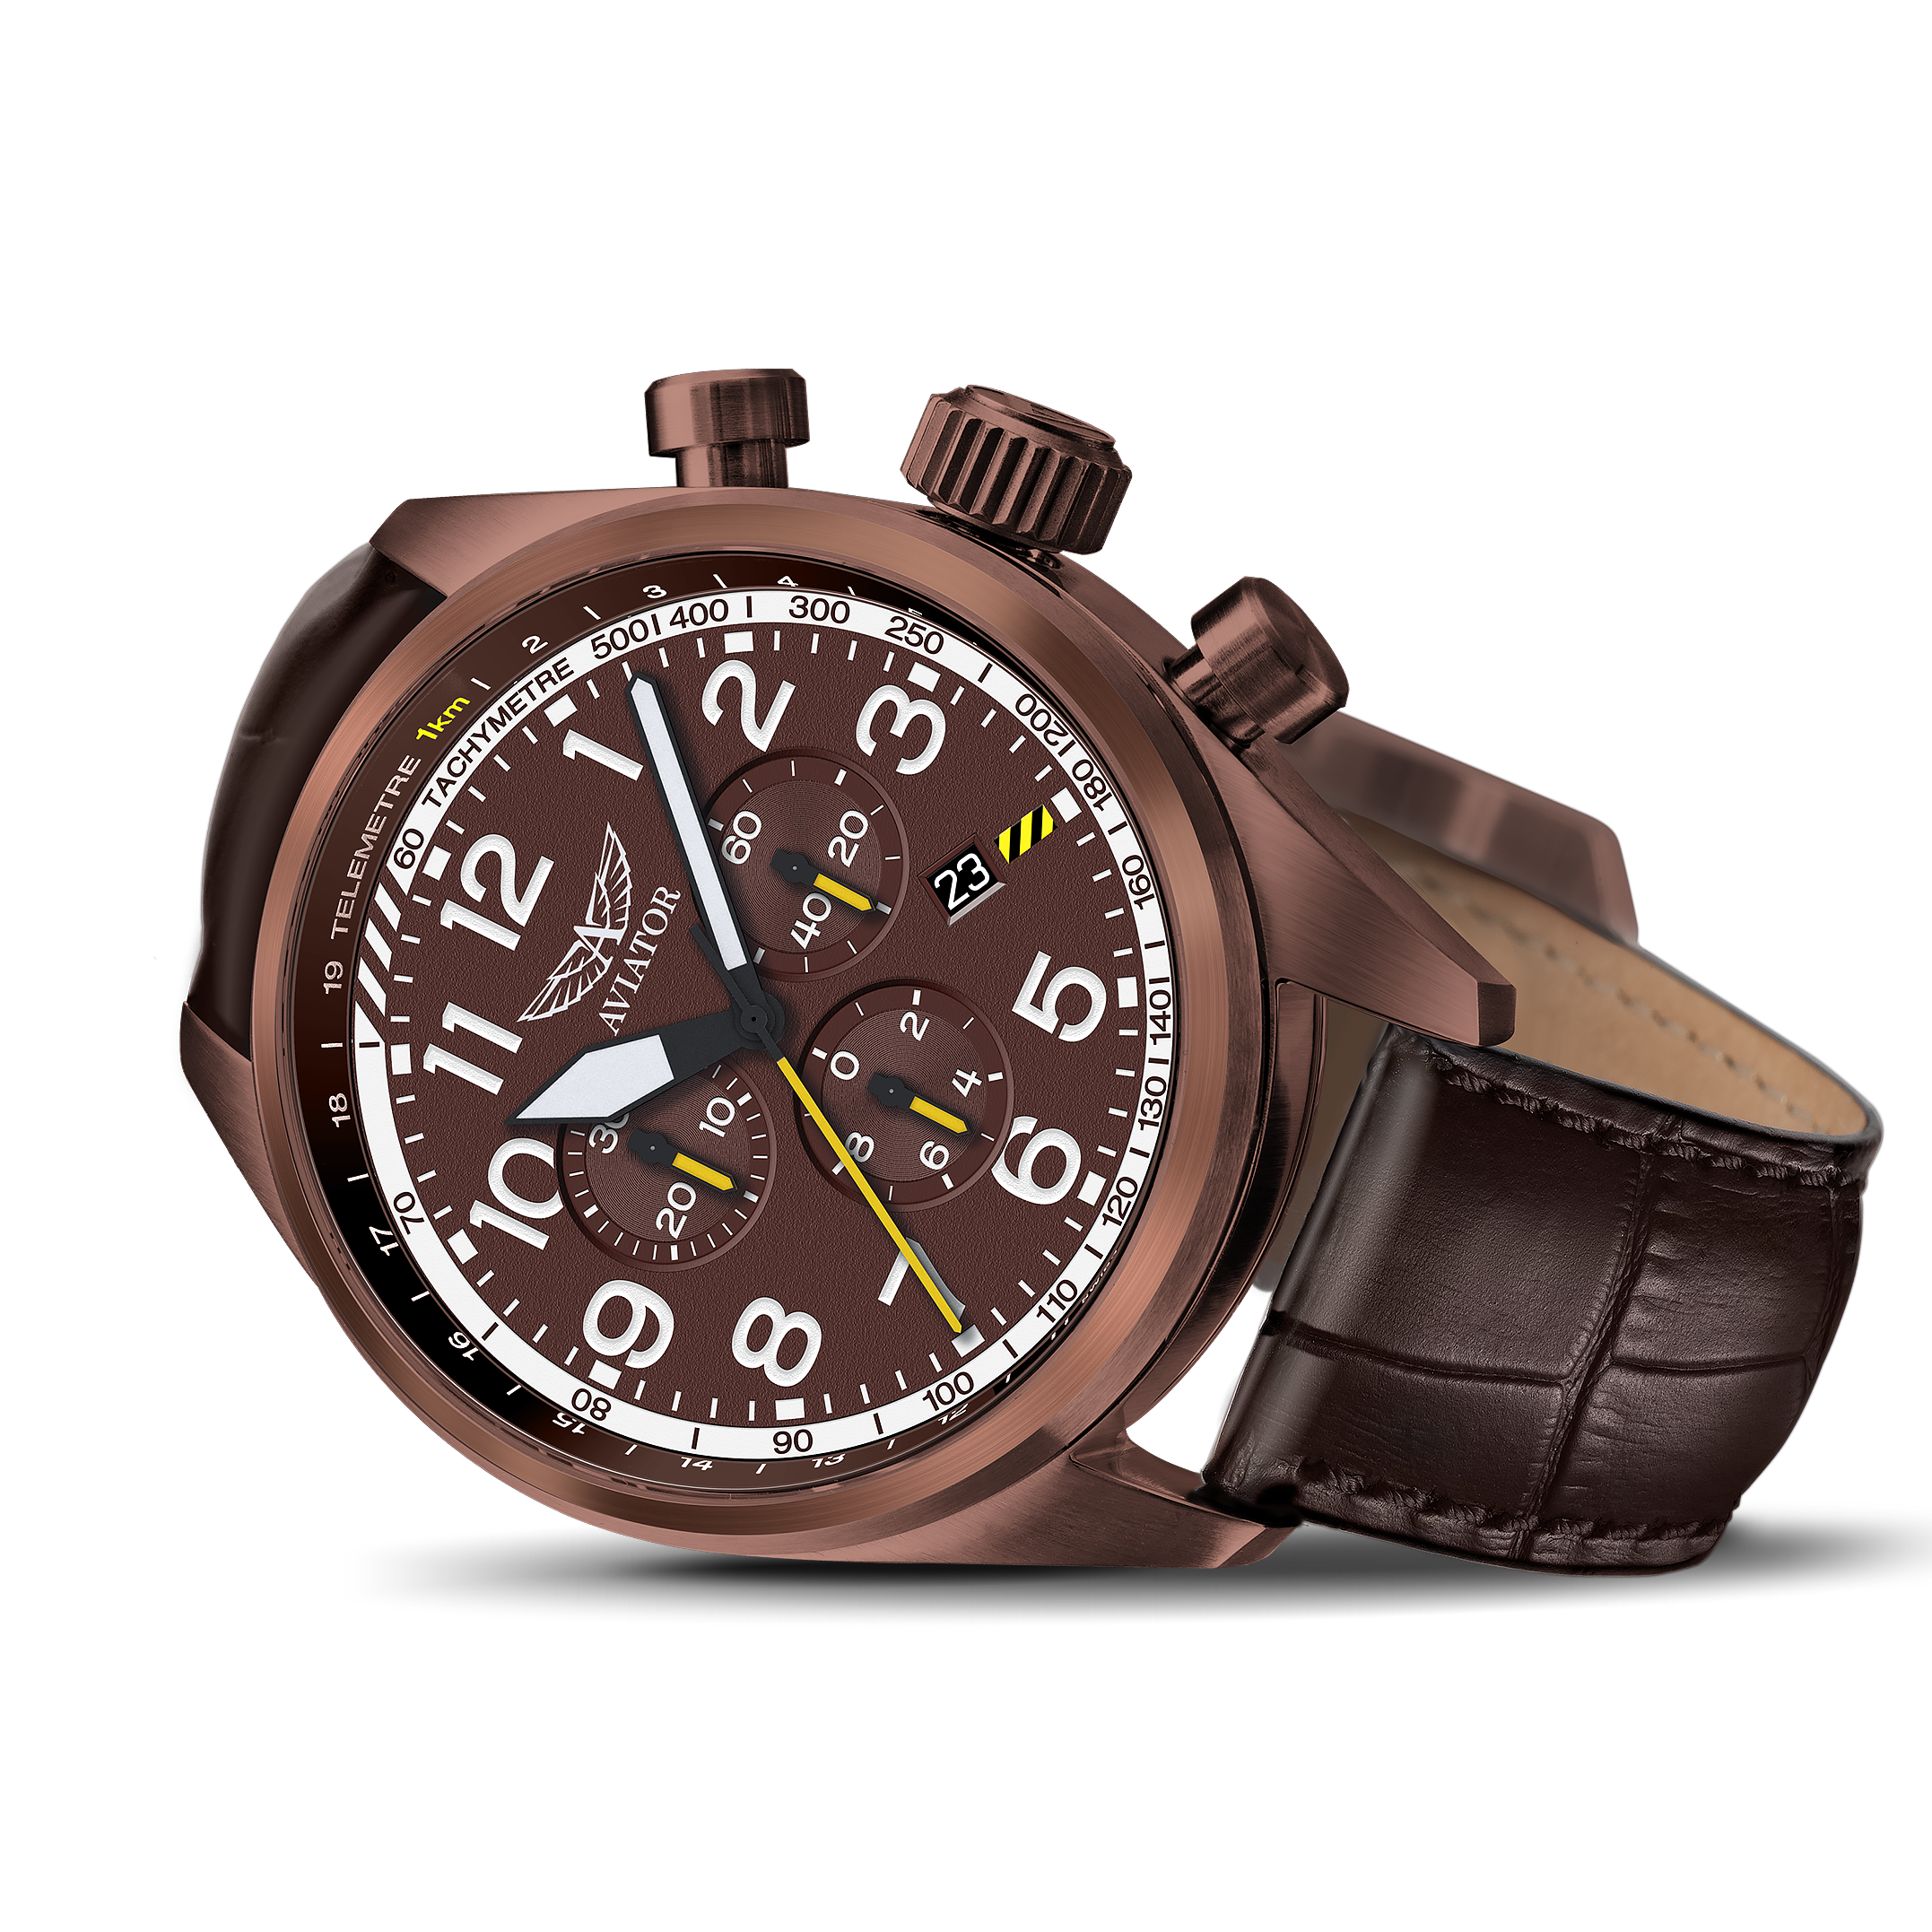 Aviator Airacobra P45 Chrono Watch with Brown Leather Strap